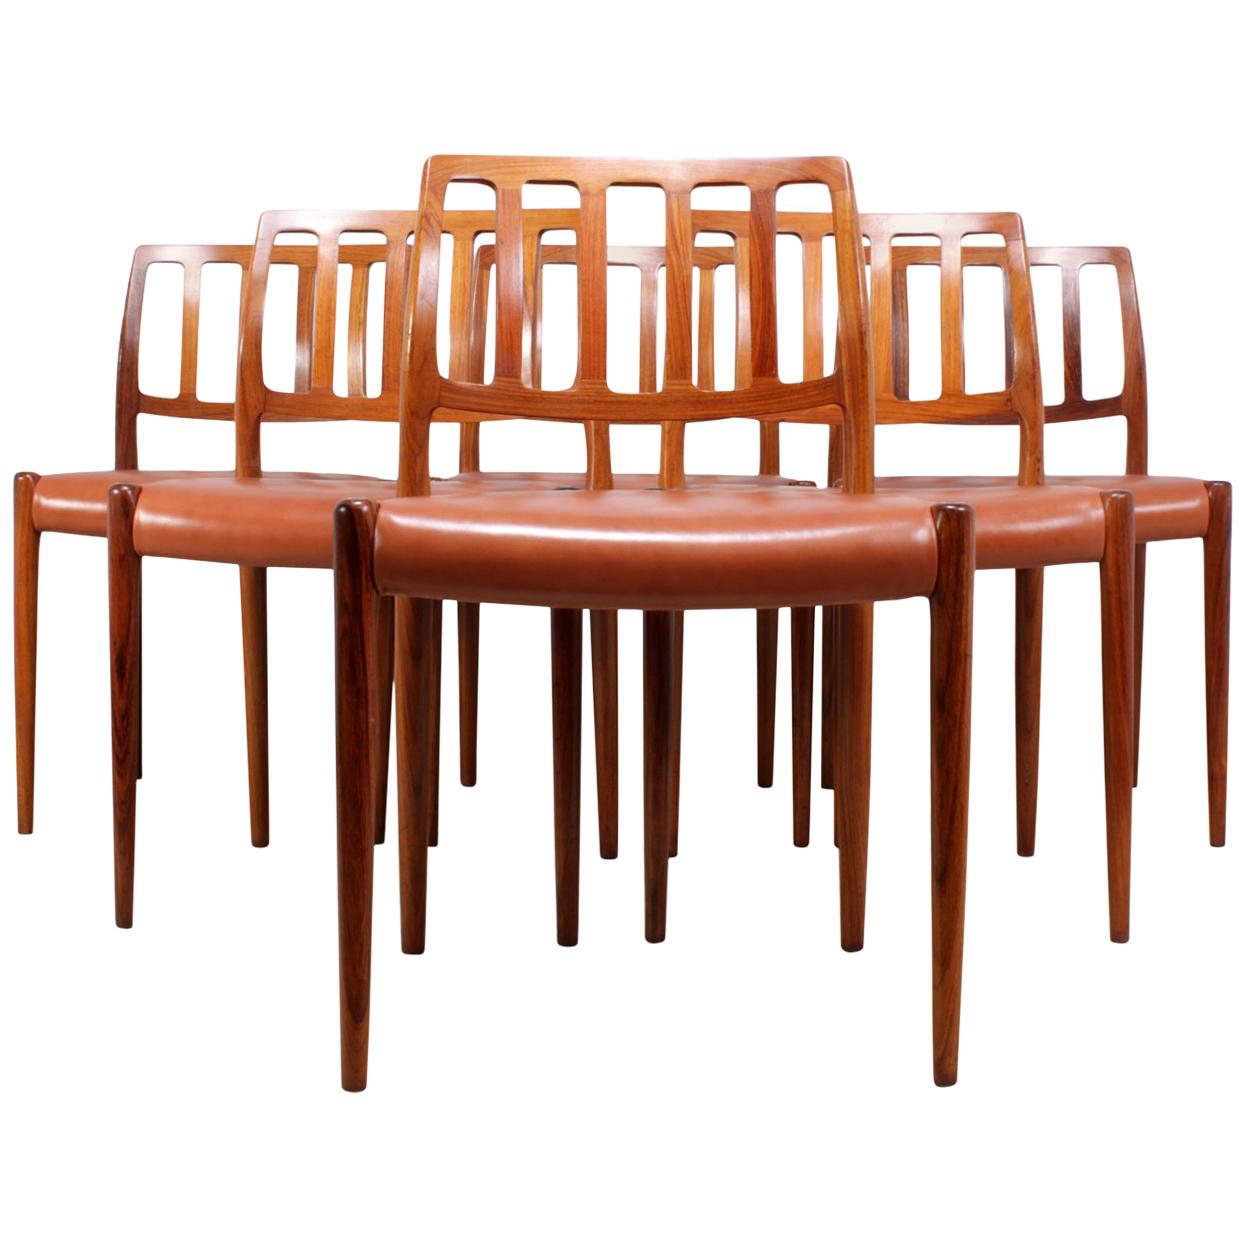 Midcentury Rosewood Dining Chairs by Moller Model 83